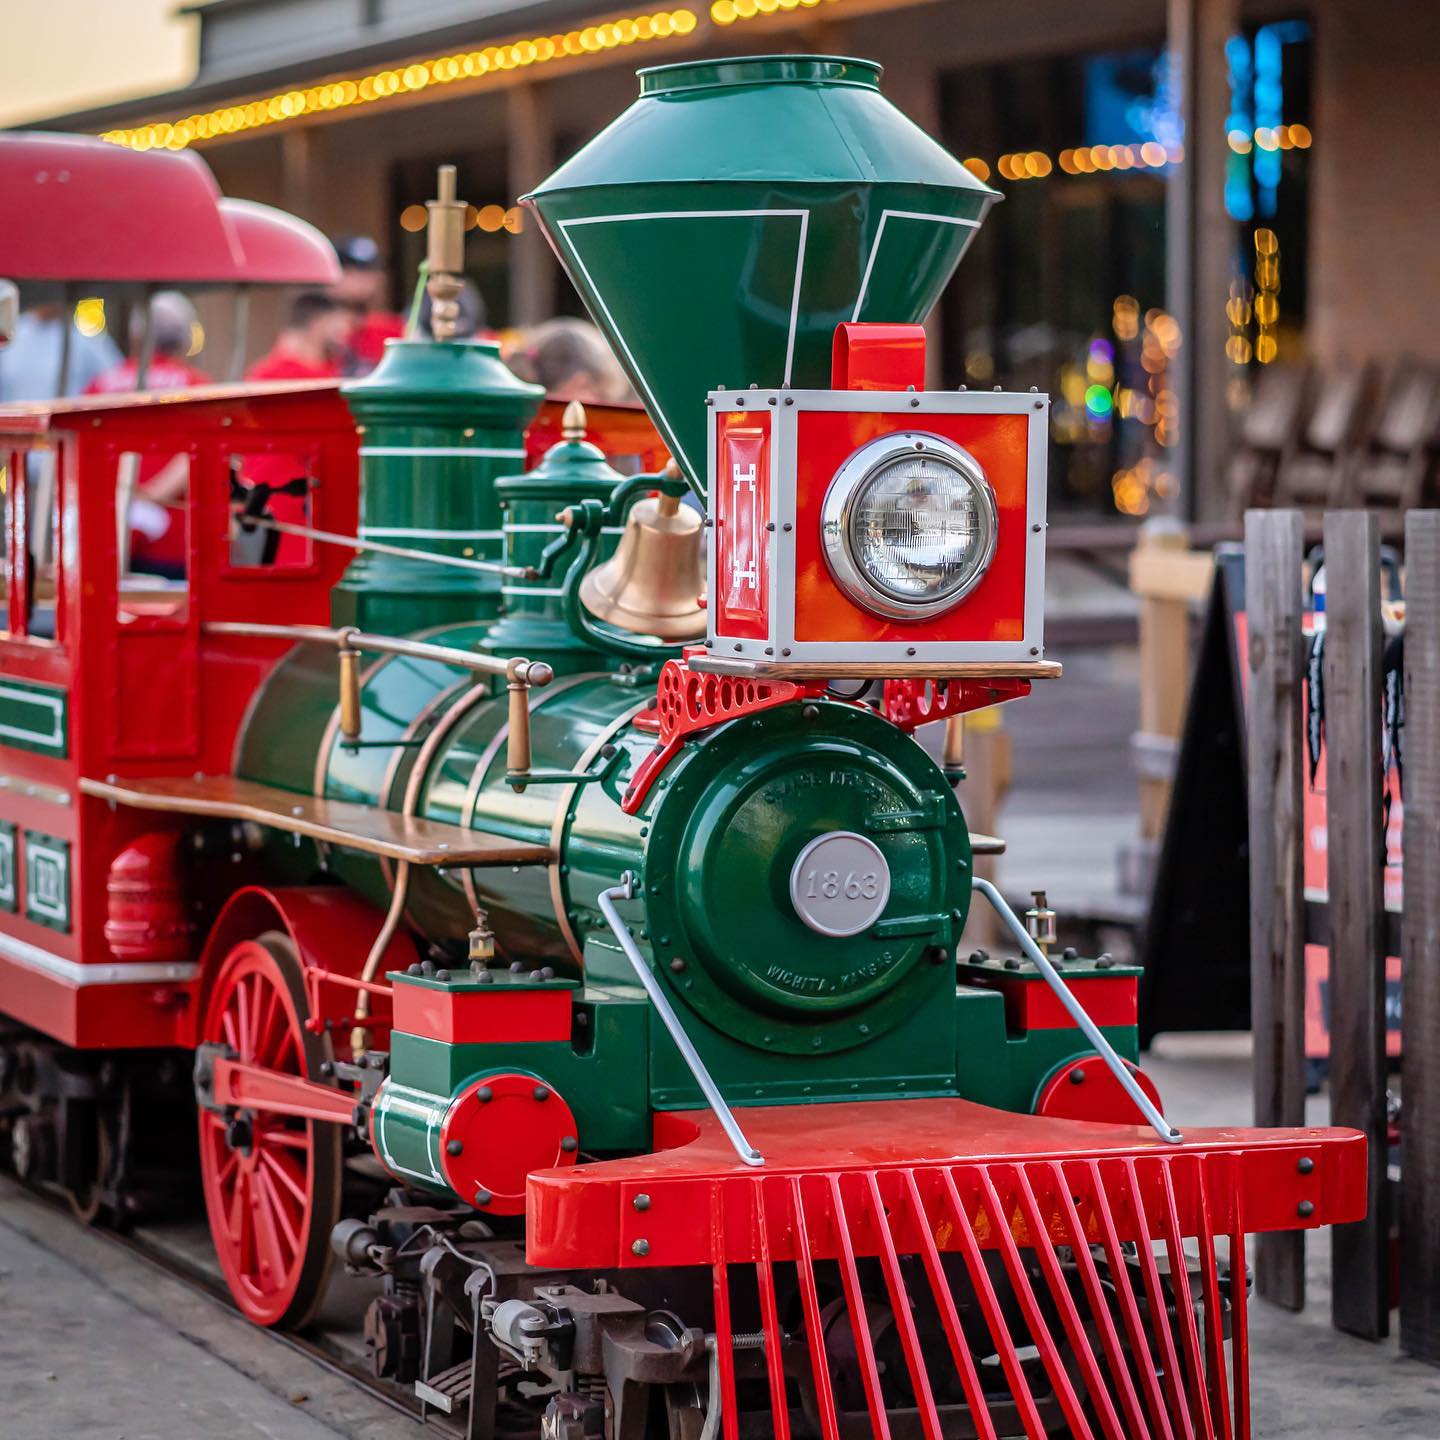 Hop aboard The Christmas Train in Alvin for a festive ride perfect for little locomotive lovers